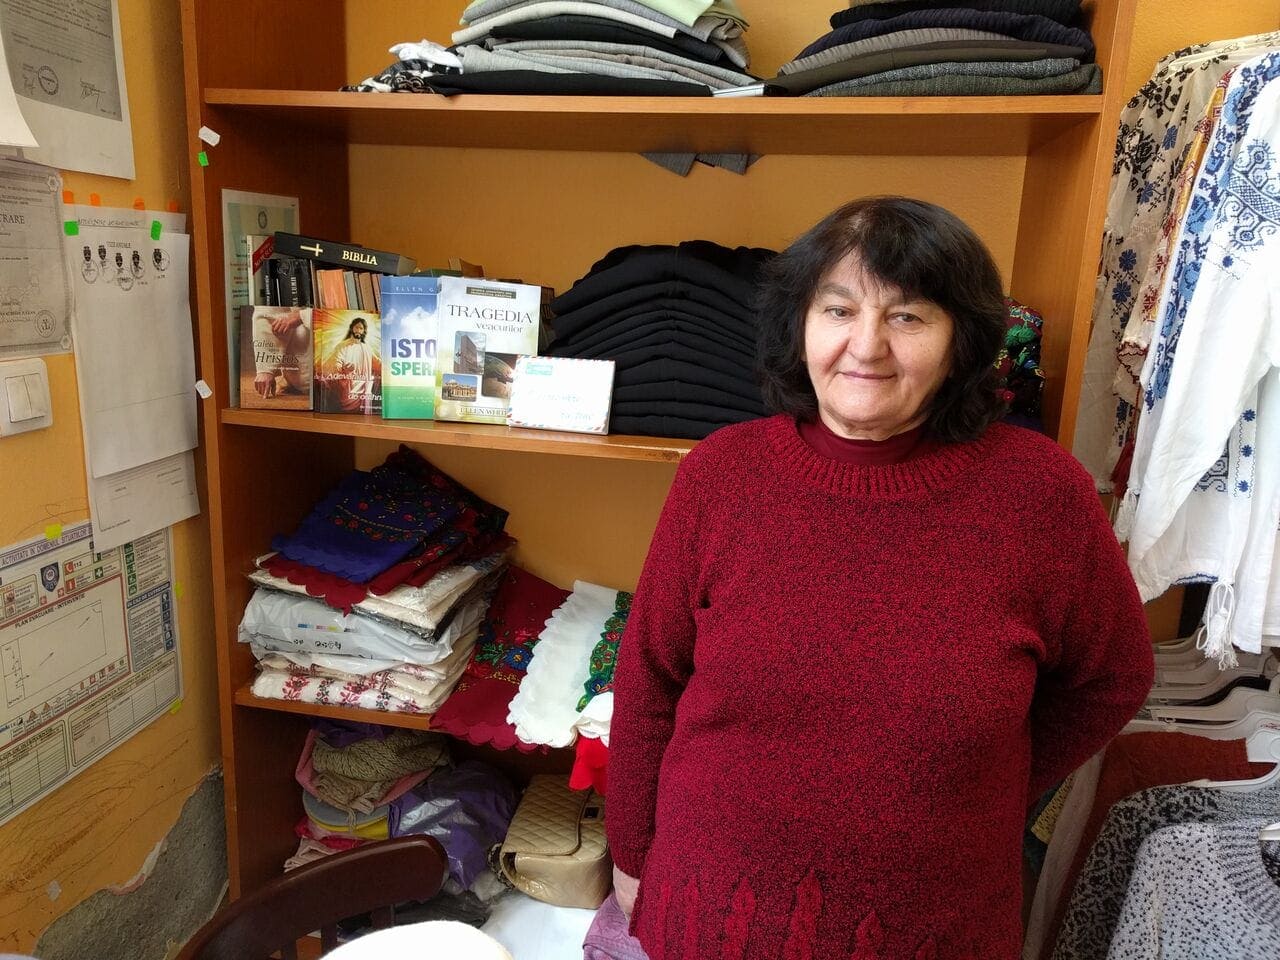 Marioara Tulcan stands in her clothing store which combines regular business with discussions on religious topics and sharing Seventh-day Adventist literature in Arad, Romania. [Photo by Ciprian Savischi] 